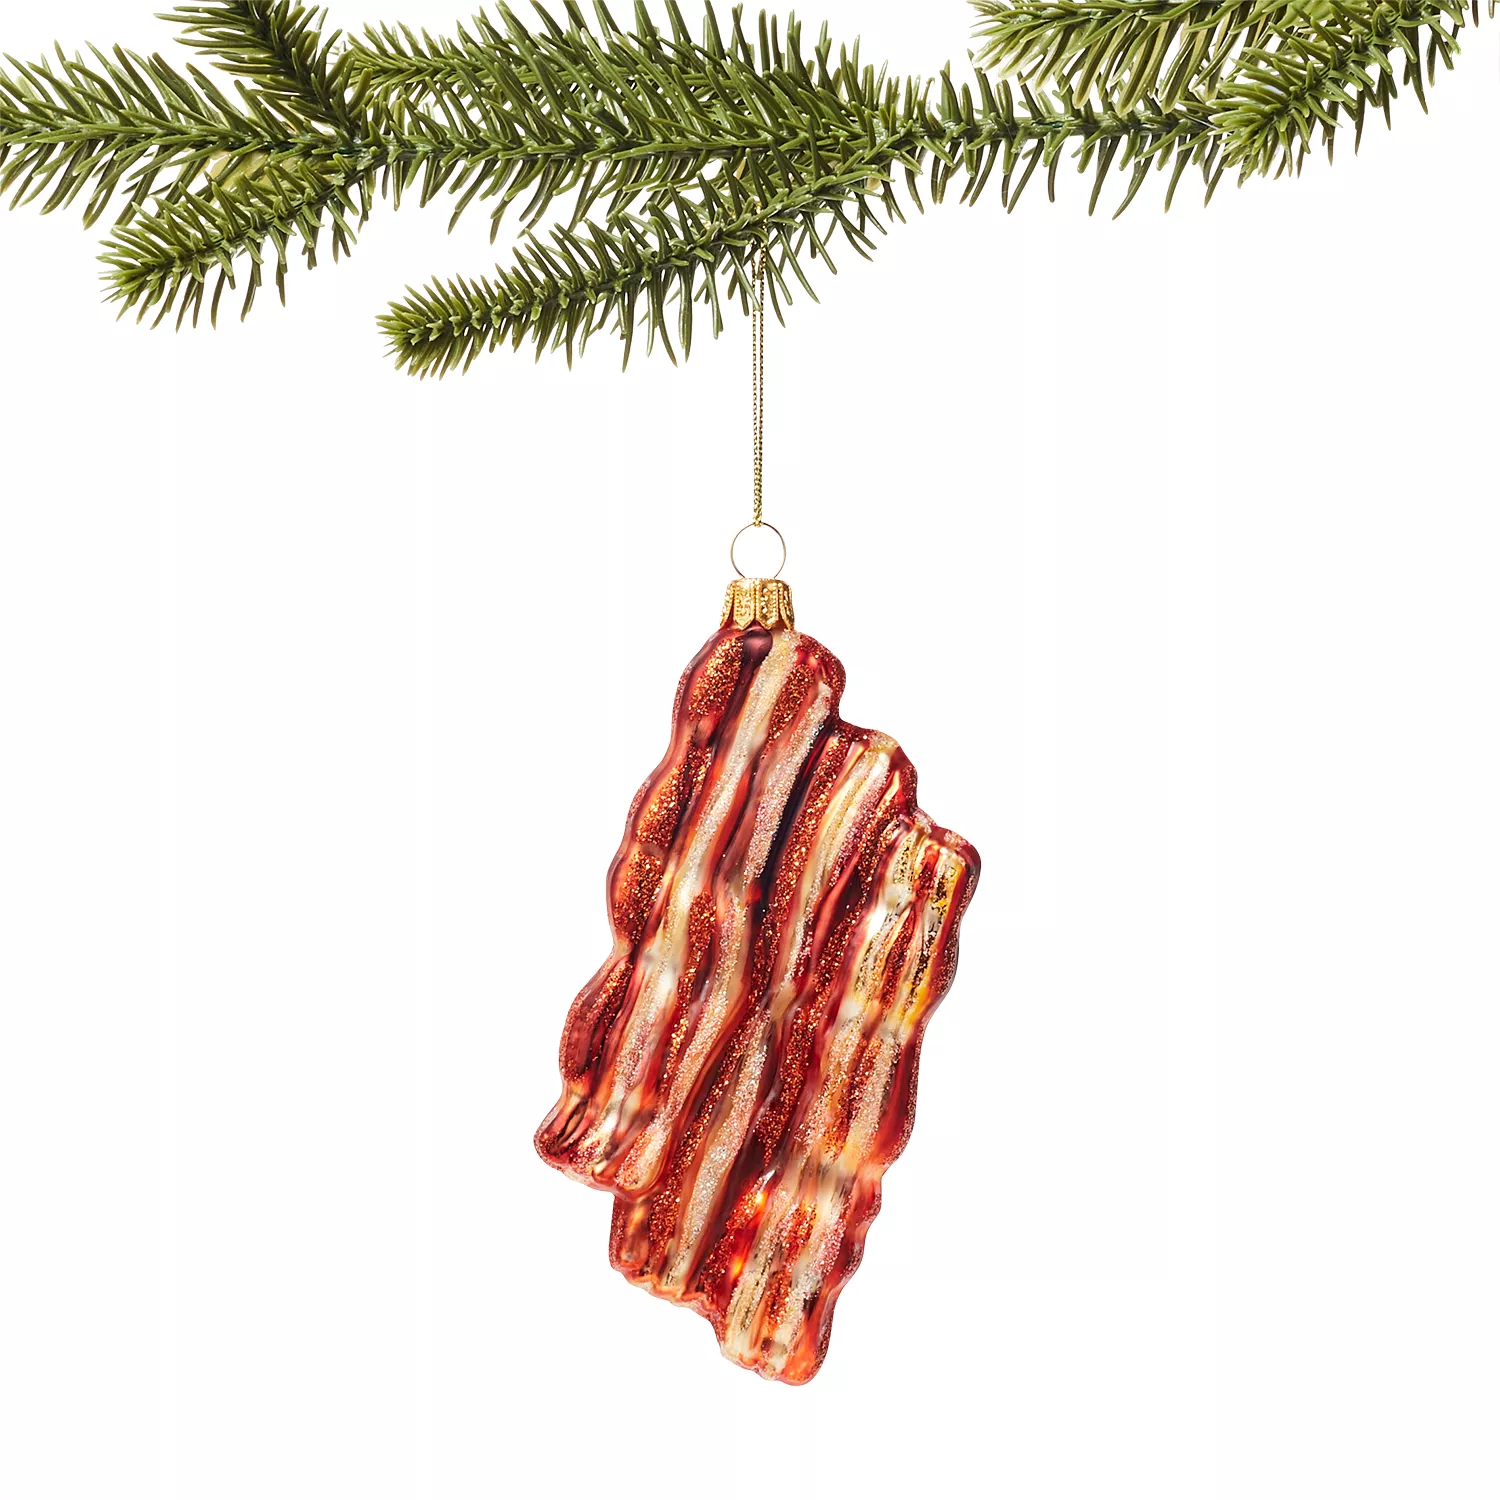 Clay Christmas Ornaments and Bacon Wrapped Sausage Horderves – RavinStudio